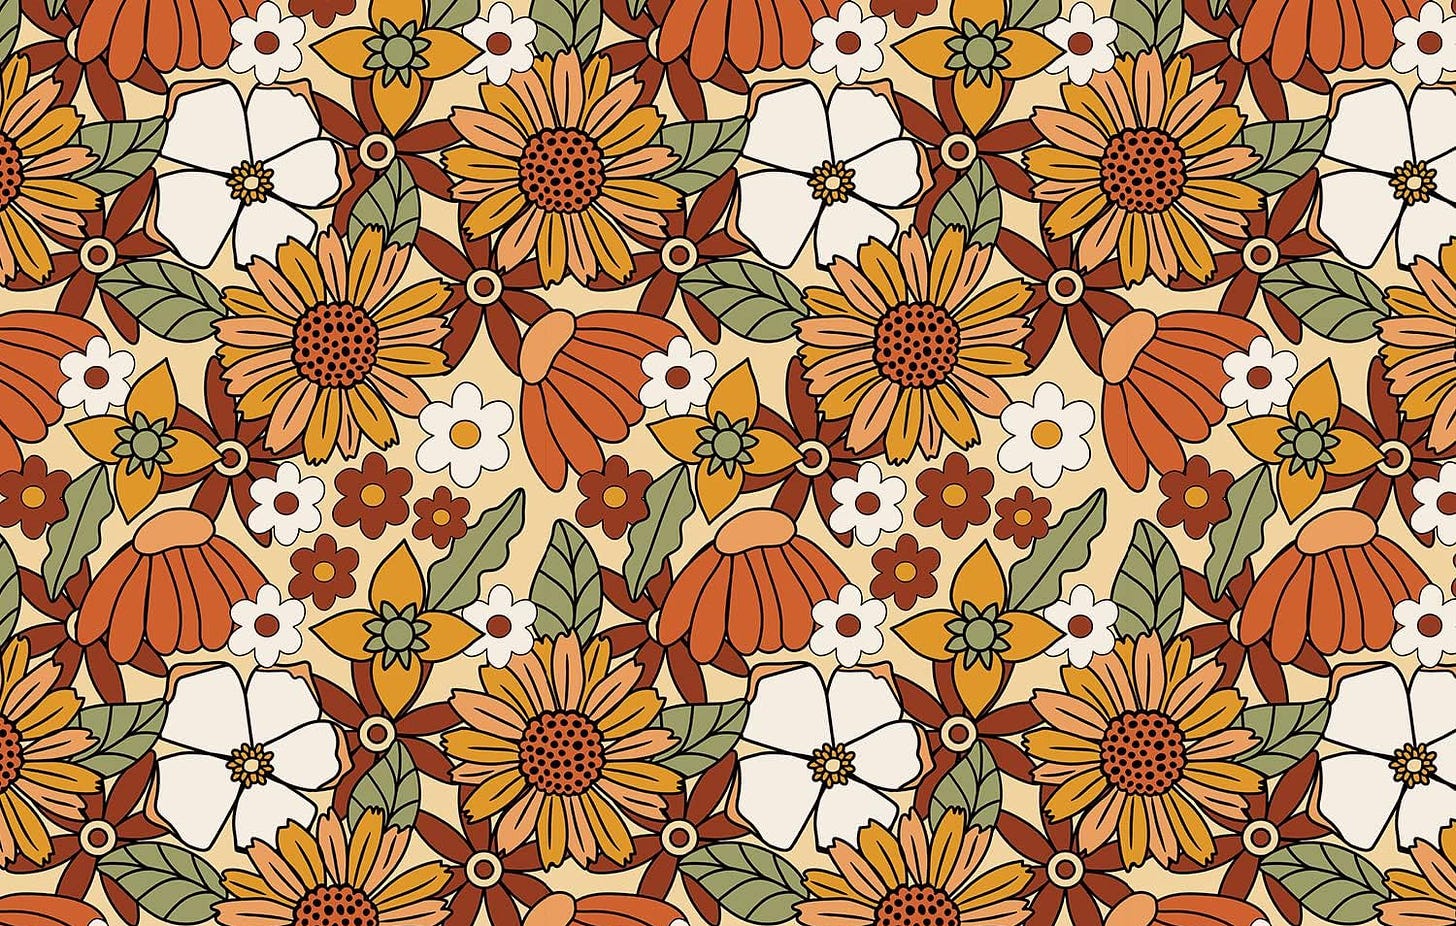 A retro 1970s style floral design of bold flowers in muted shades of orange, brown, peach, yellow and white on a cream background